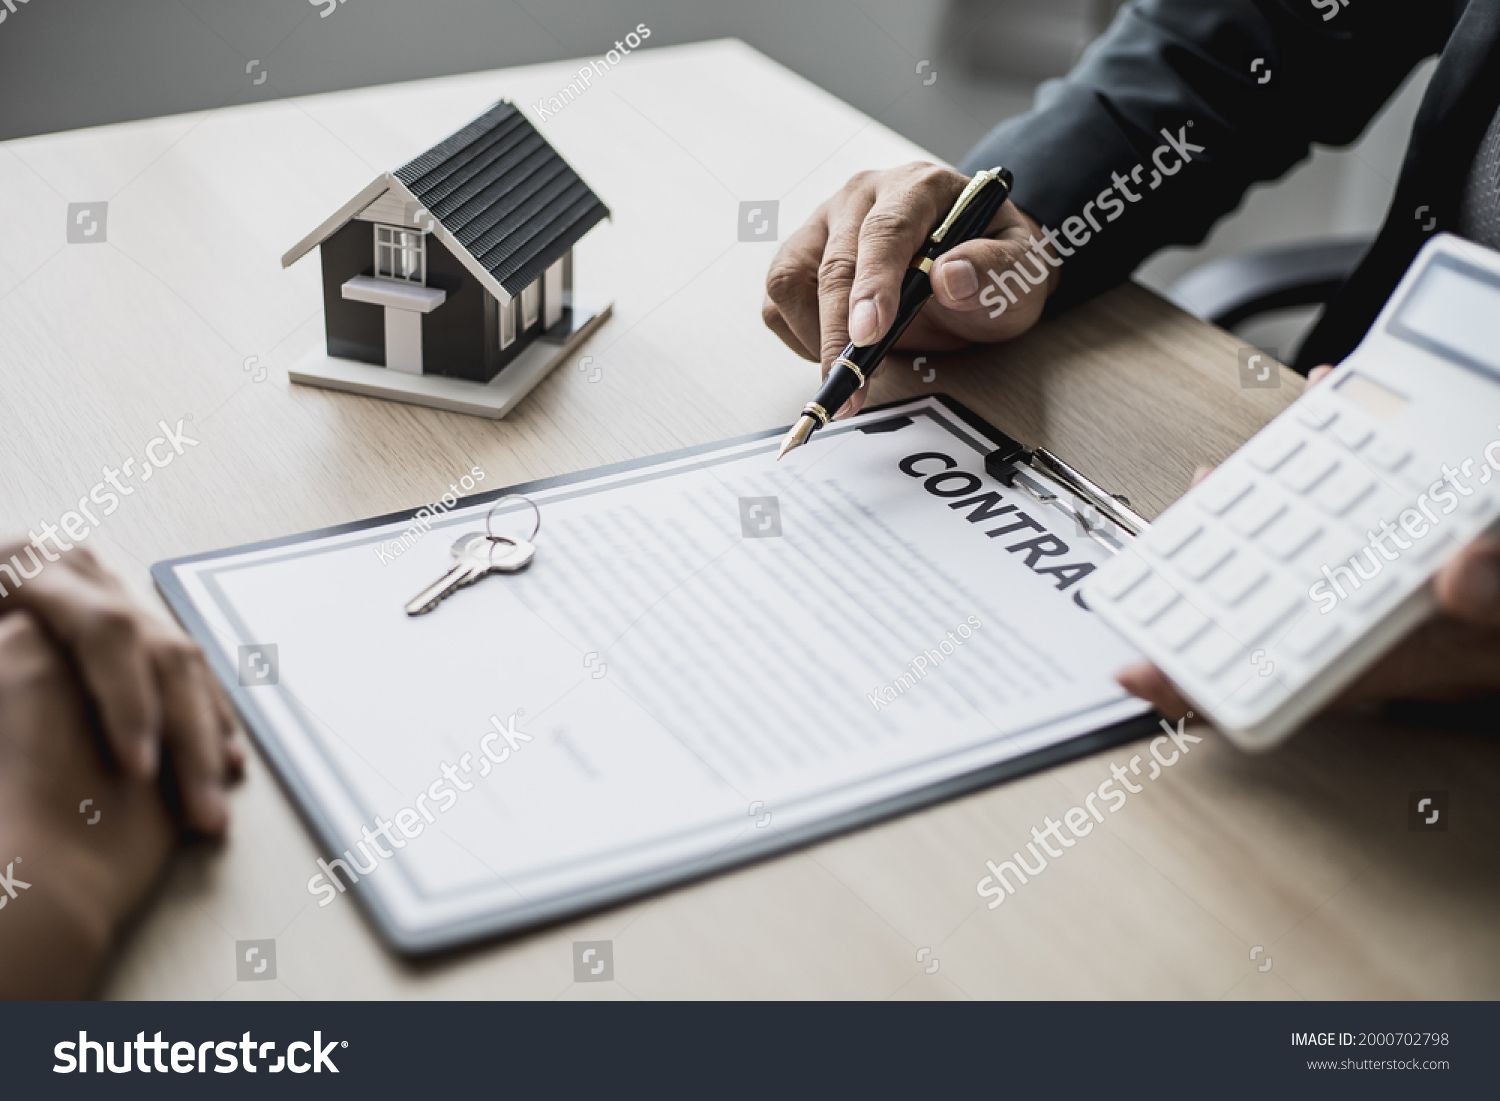 Employees use the calculator to calculate monthly rent for tenants and explain renting details and calculate monthly rent payments to tenants before signing the contract. Renting a house concept. #2000702798